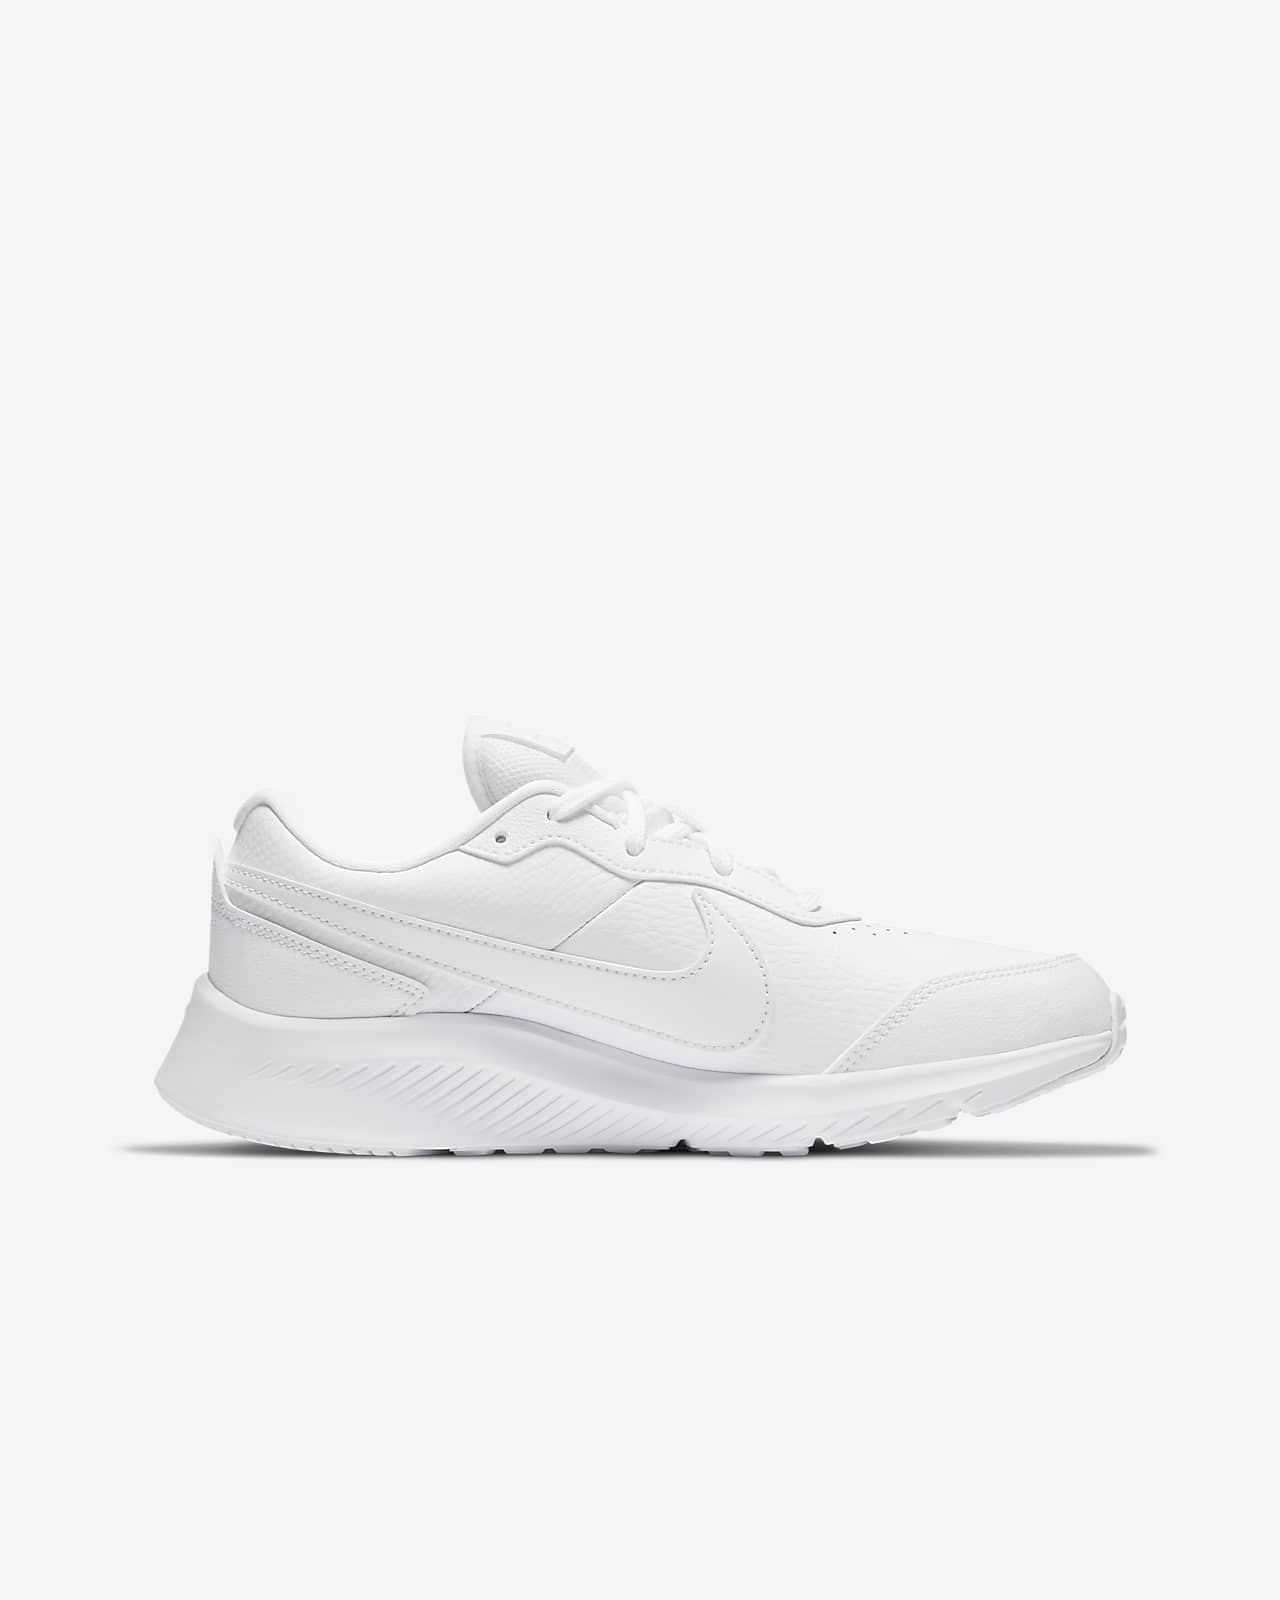 leather nike running shoes